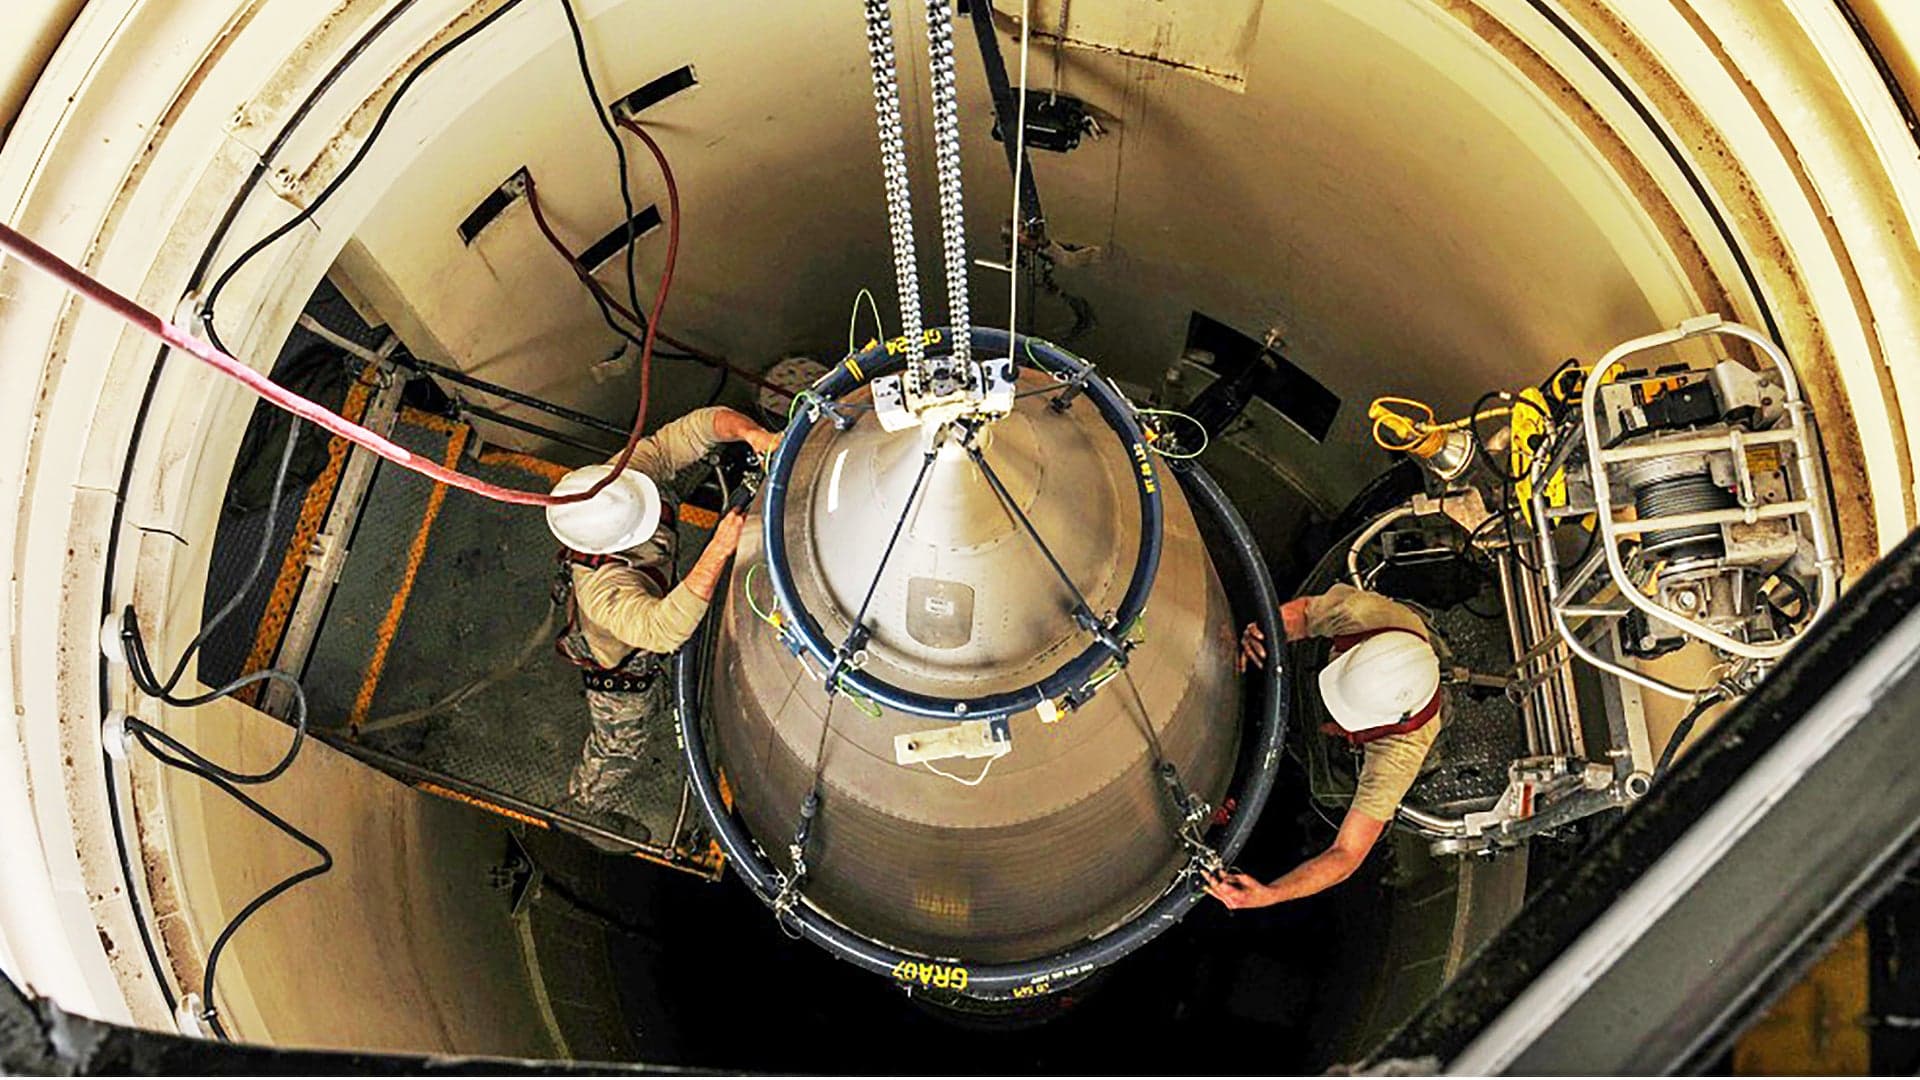 Updating America’s Land-Based Ballistic Missile ‘Nuclear Sponge’ Is A $100B+ Waste